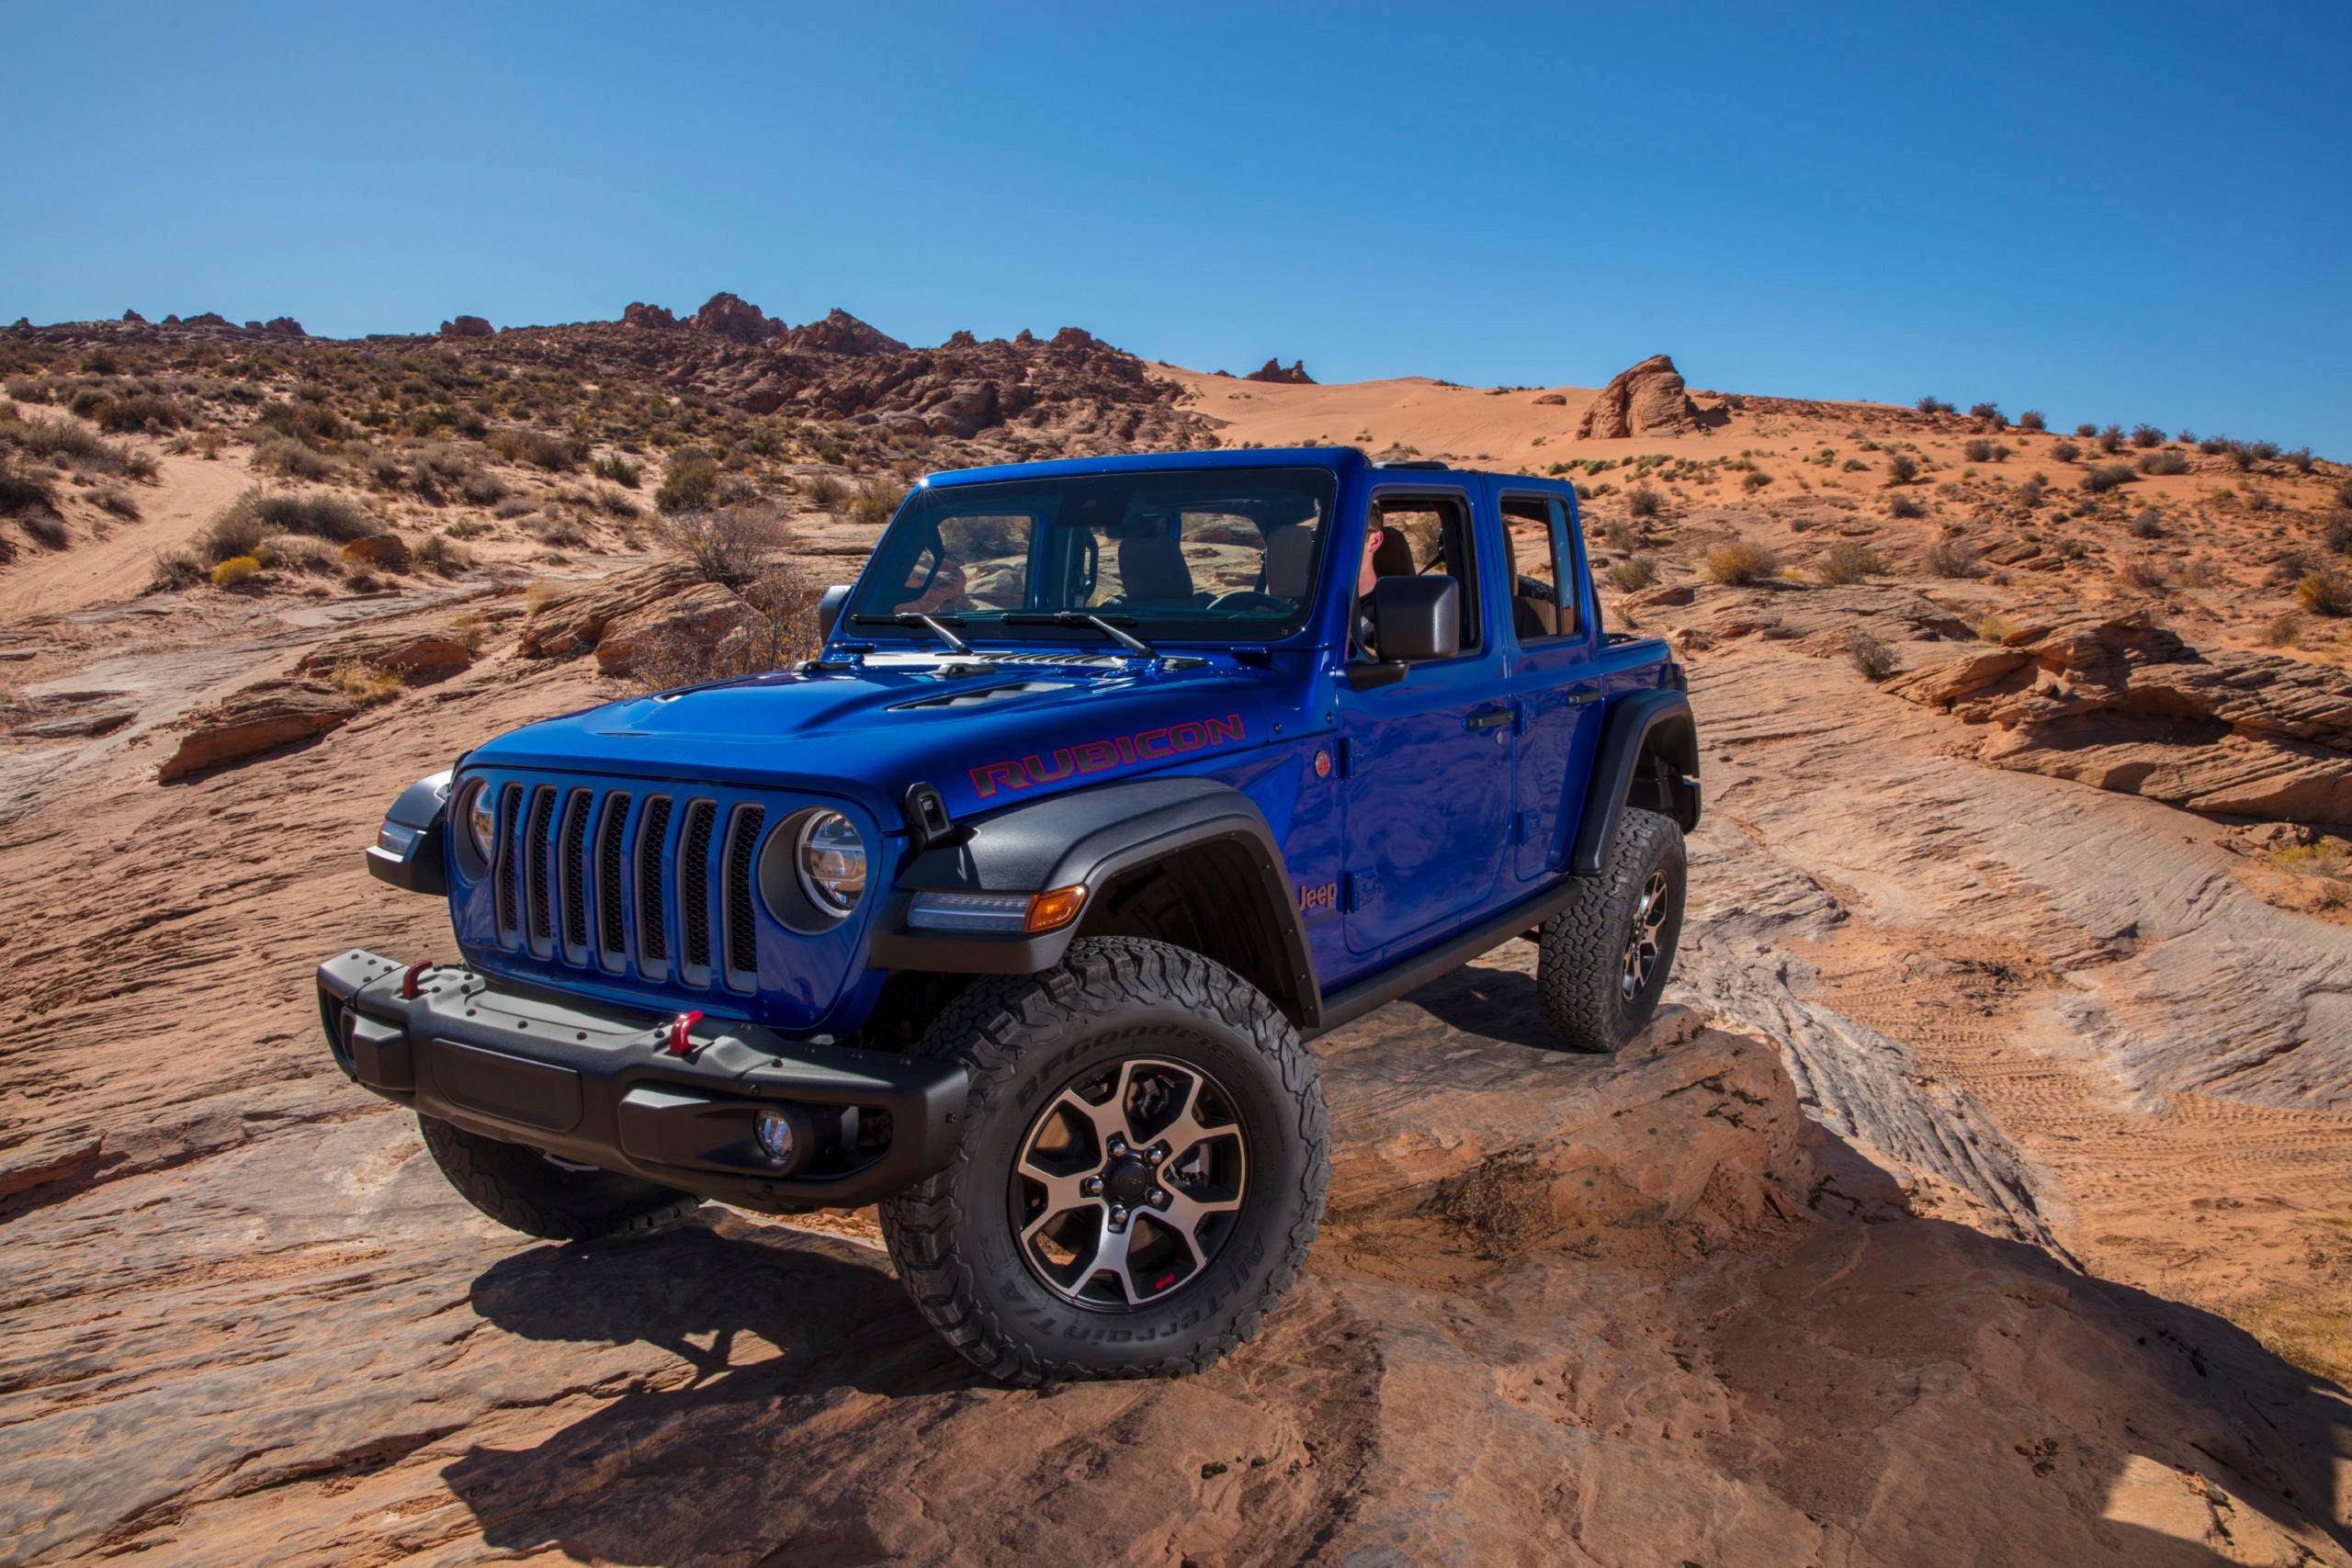 Jeep Wrangler finally has a diesel engine: Here's what's great about it